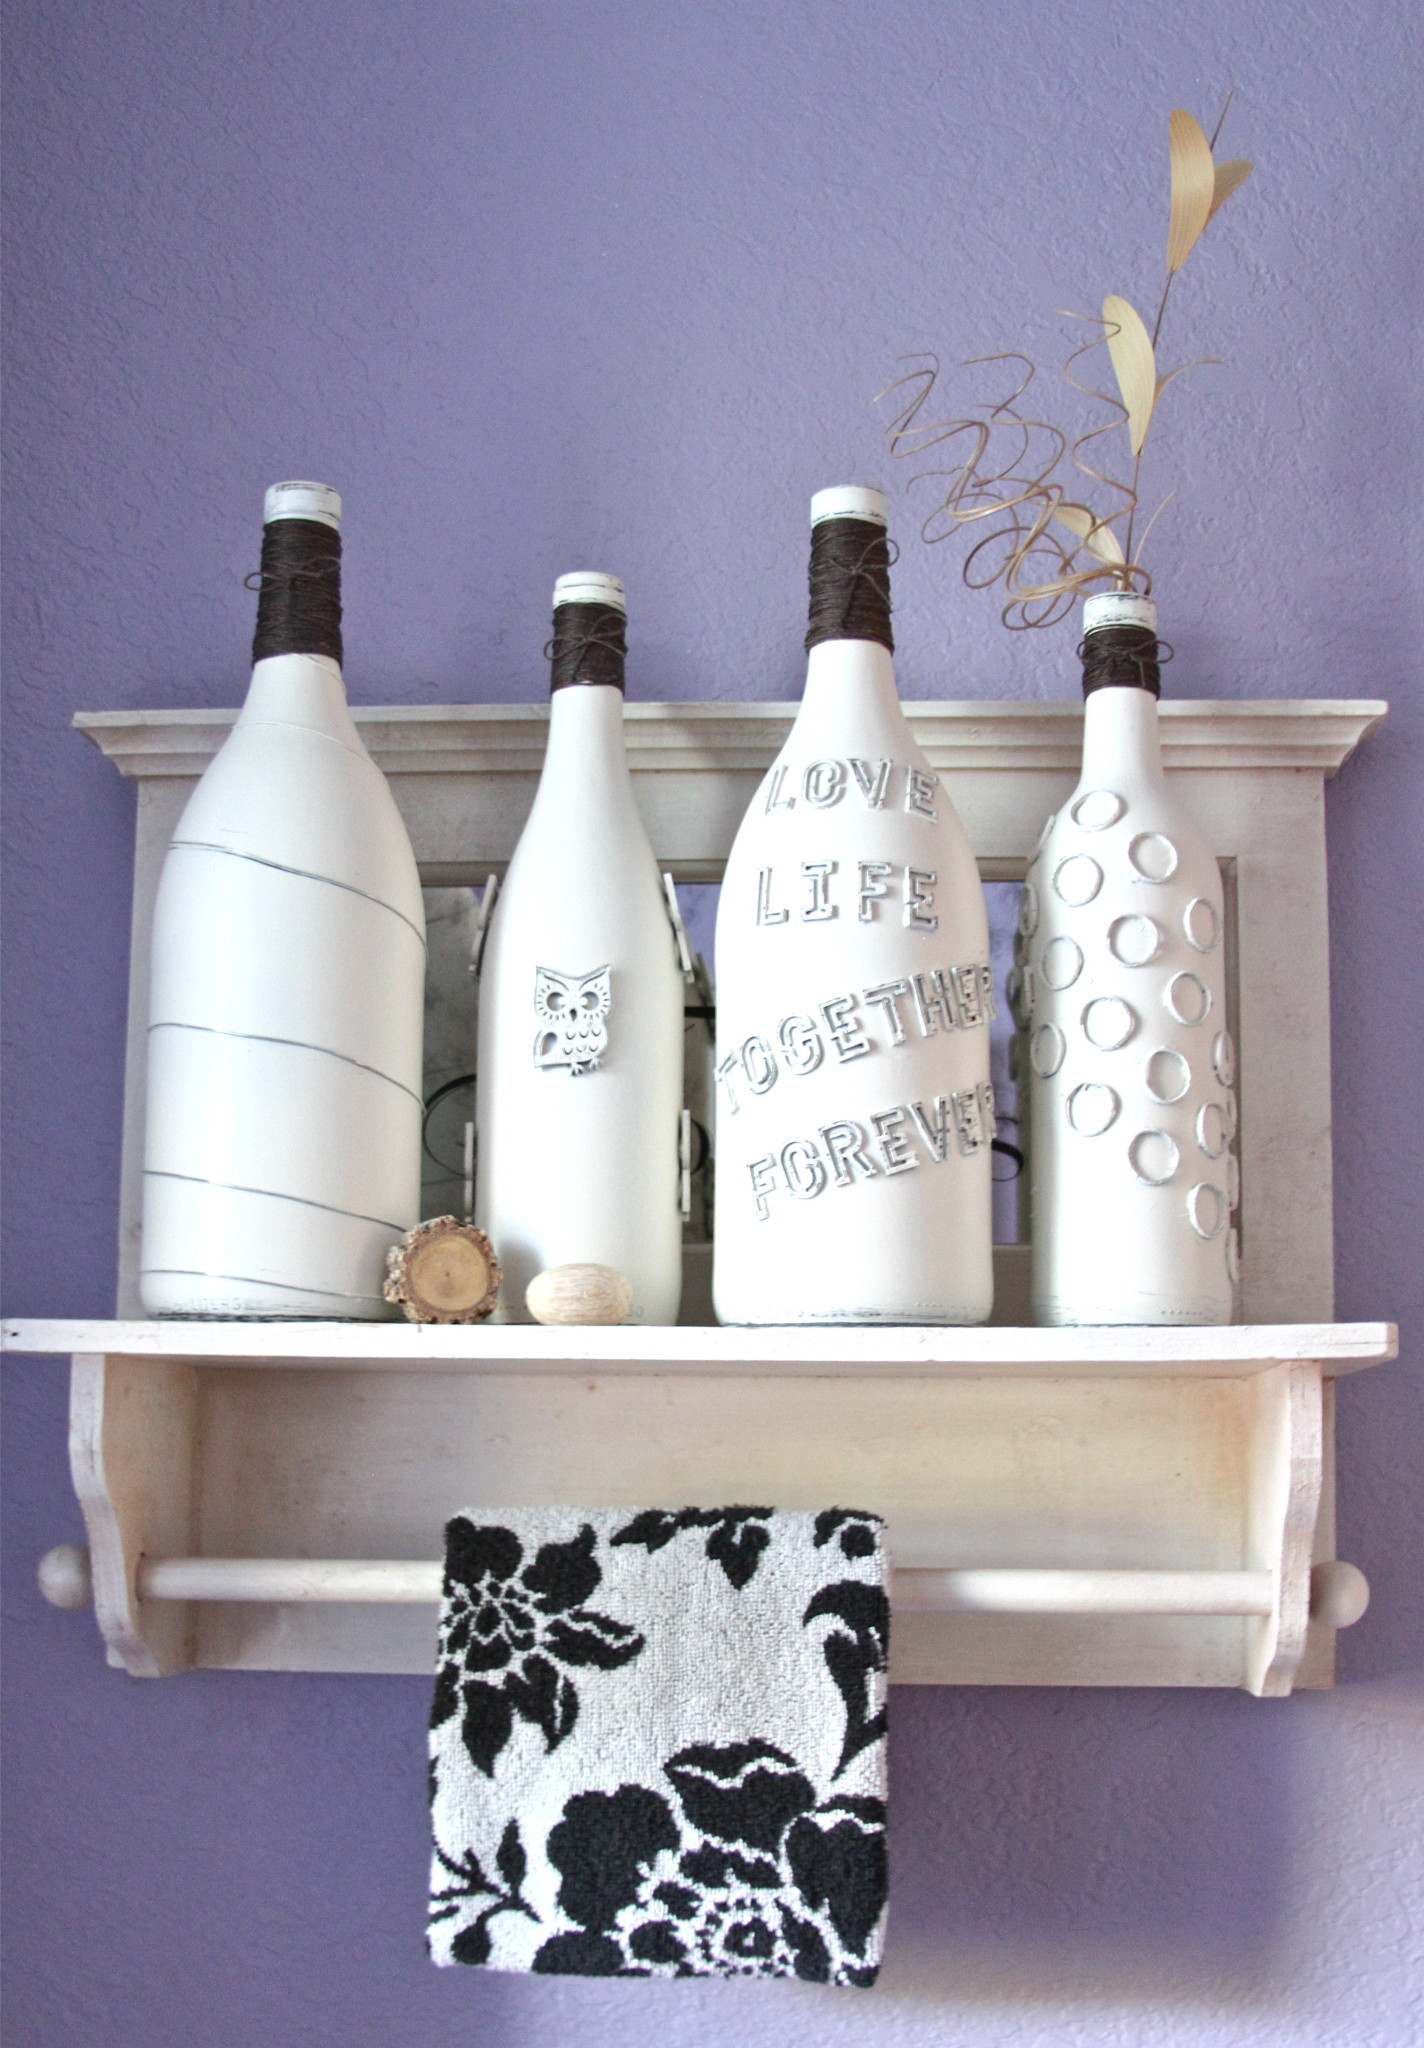 DIY Decorated Wine Bottles
 DIY Idea To Decorate a Wine Bottle The Chelle Project